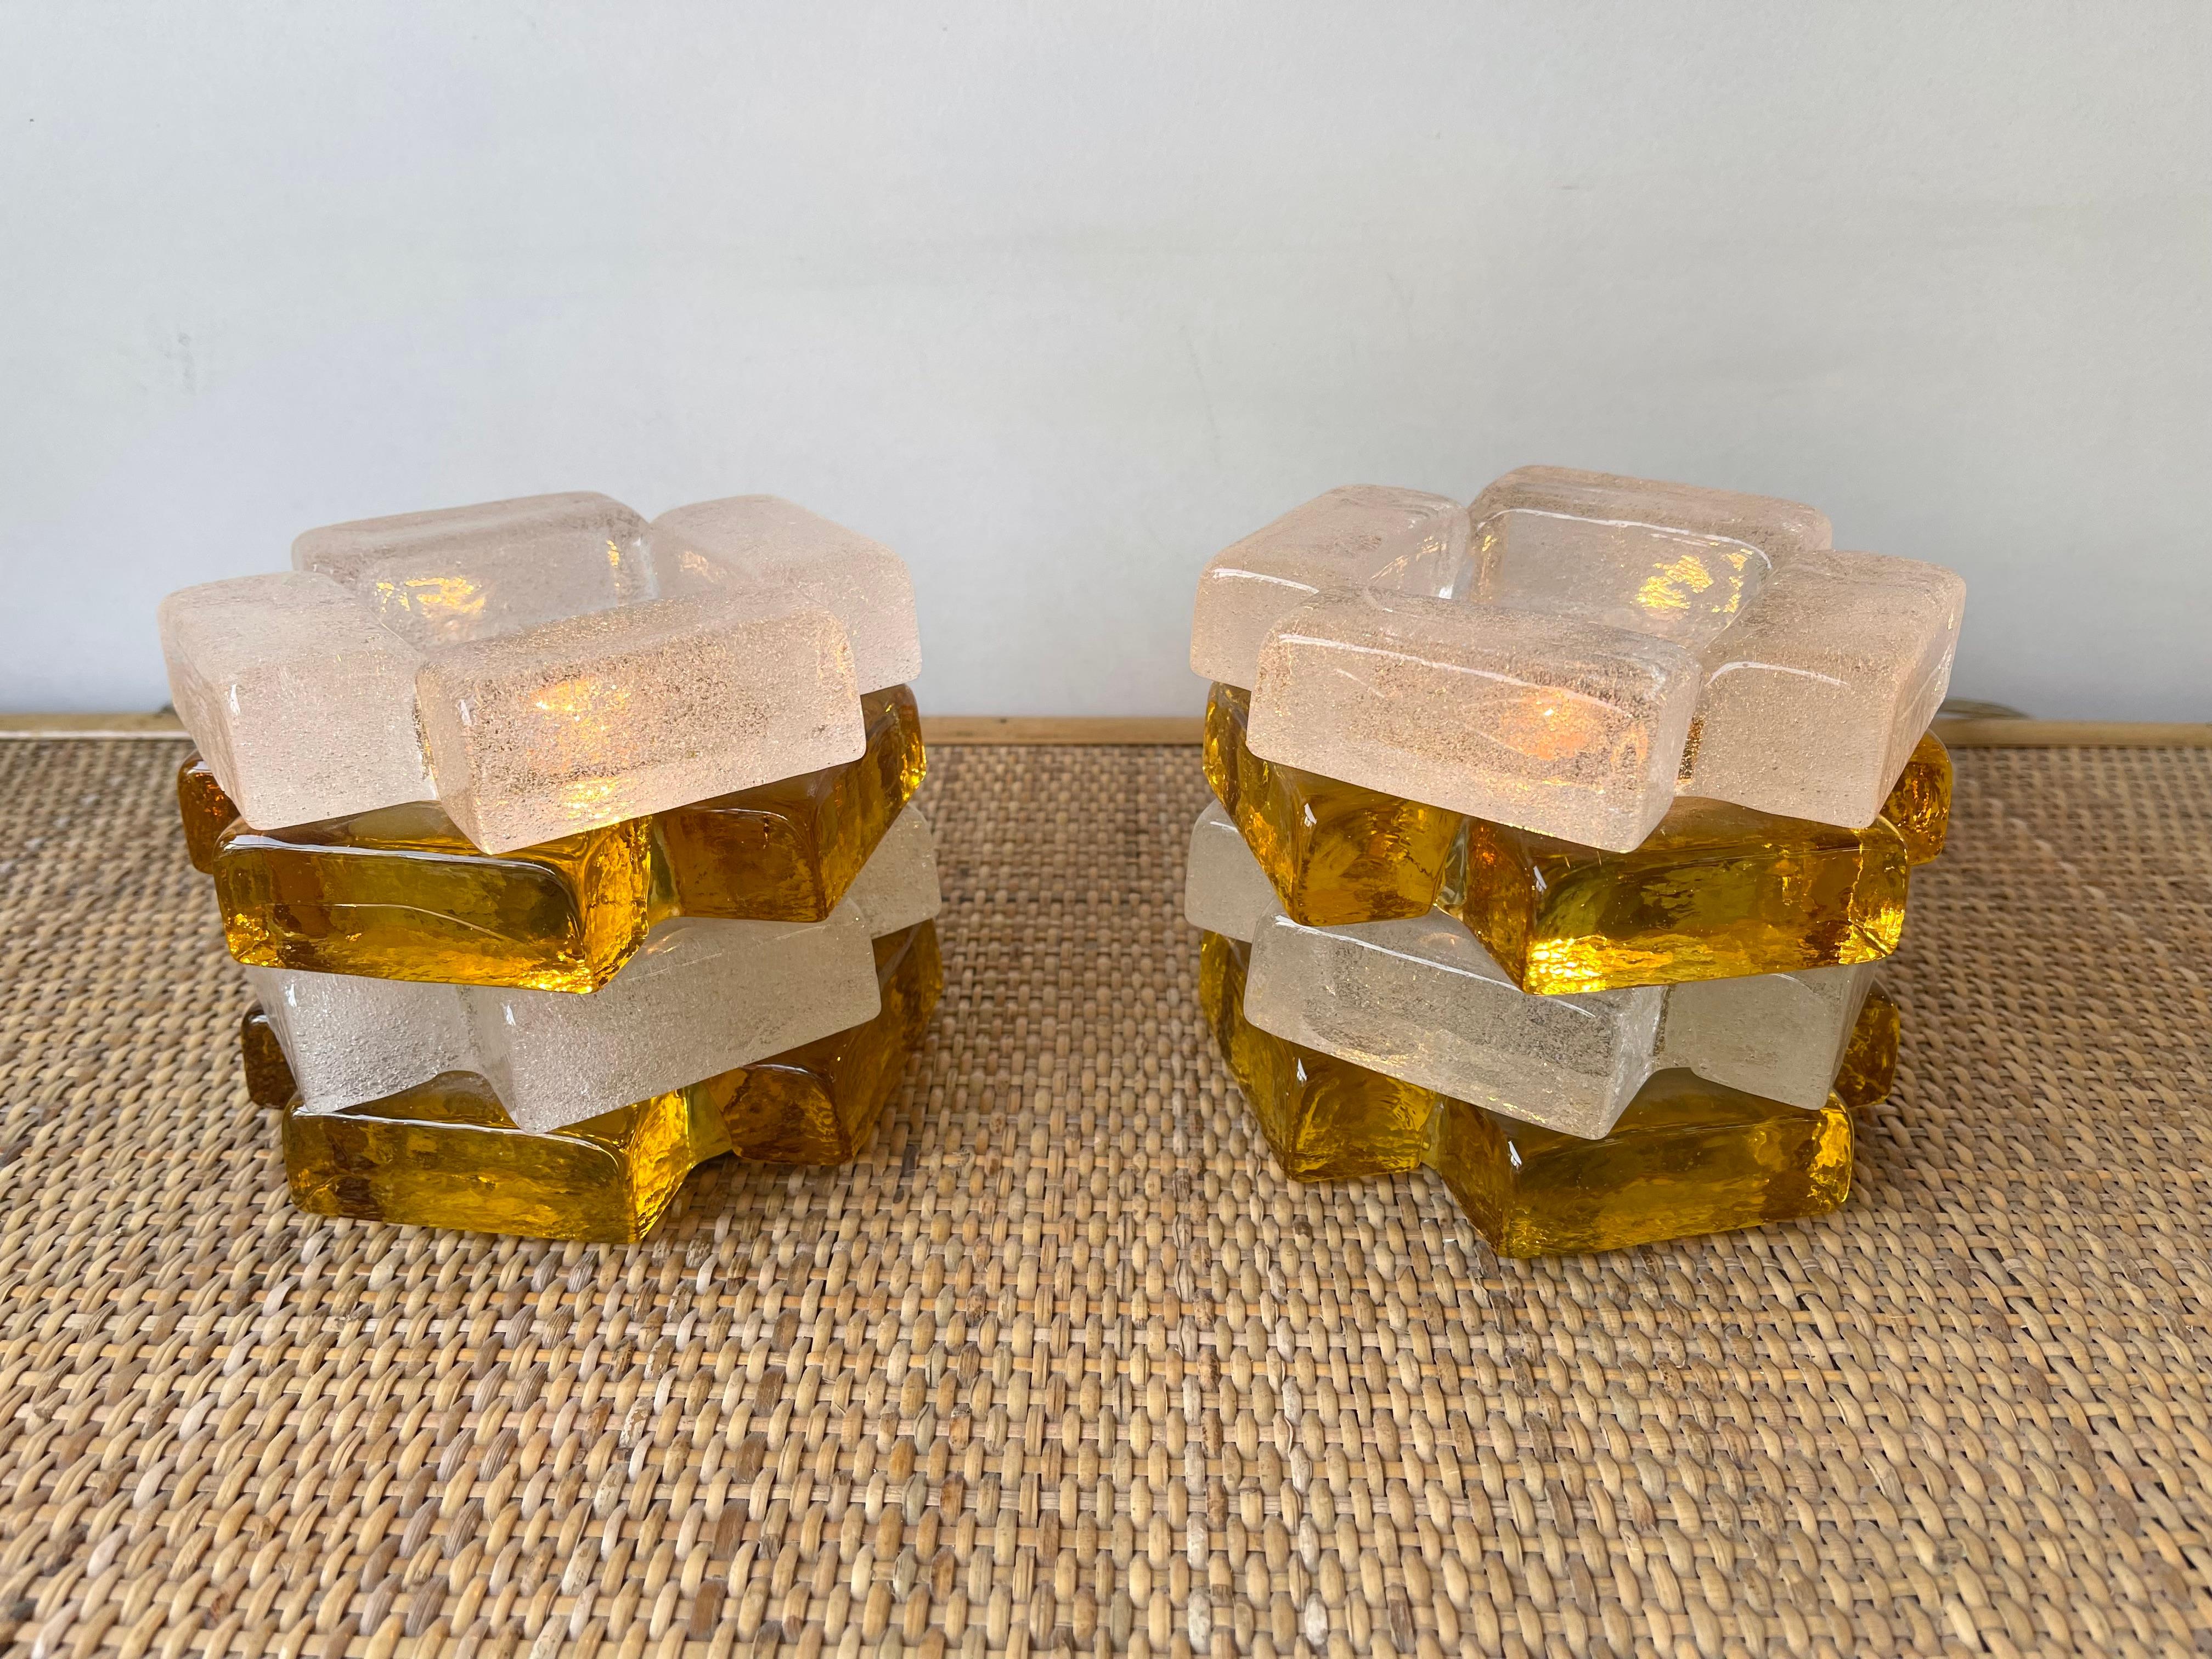 Pressed Pair of Amber Glass Cube Lamps by Poliarte, Italy, 1970s